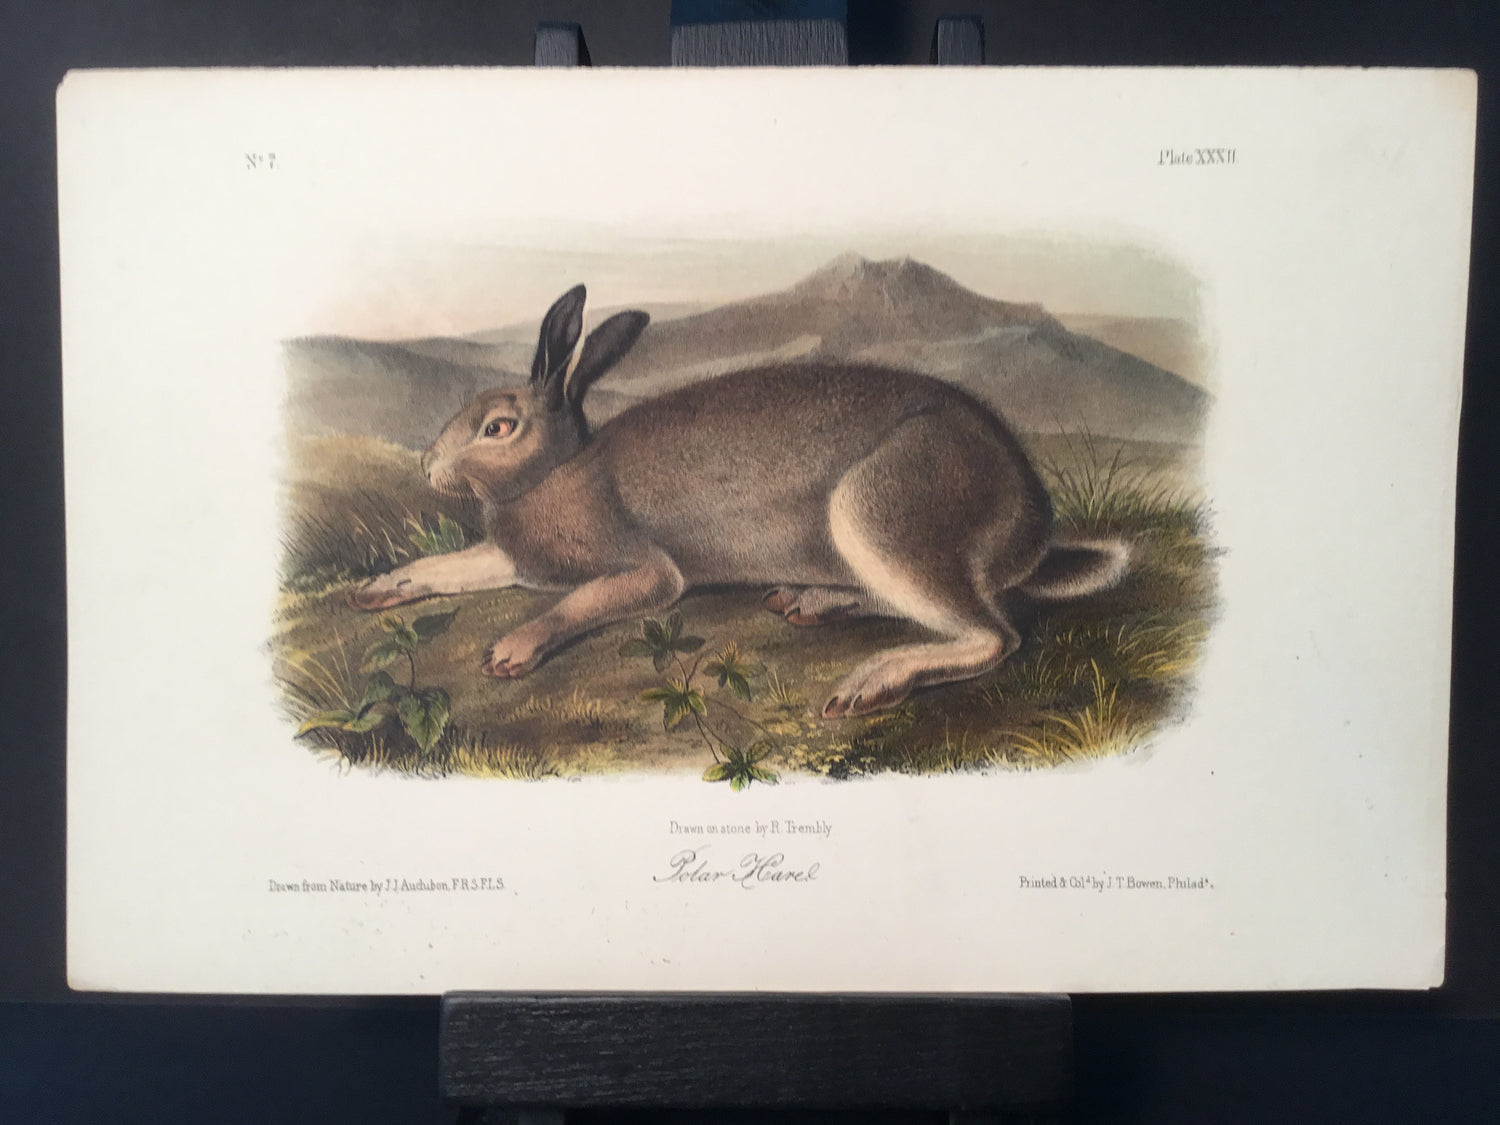 Lord-Hopkins Collection - Polar Hare